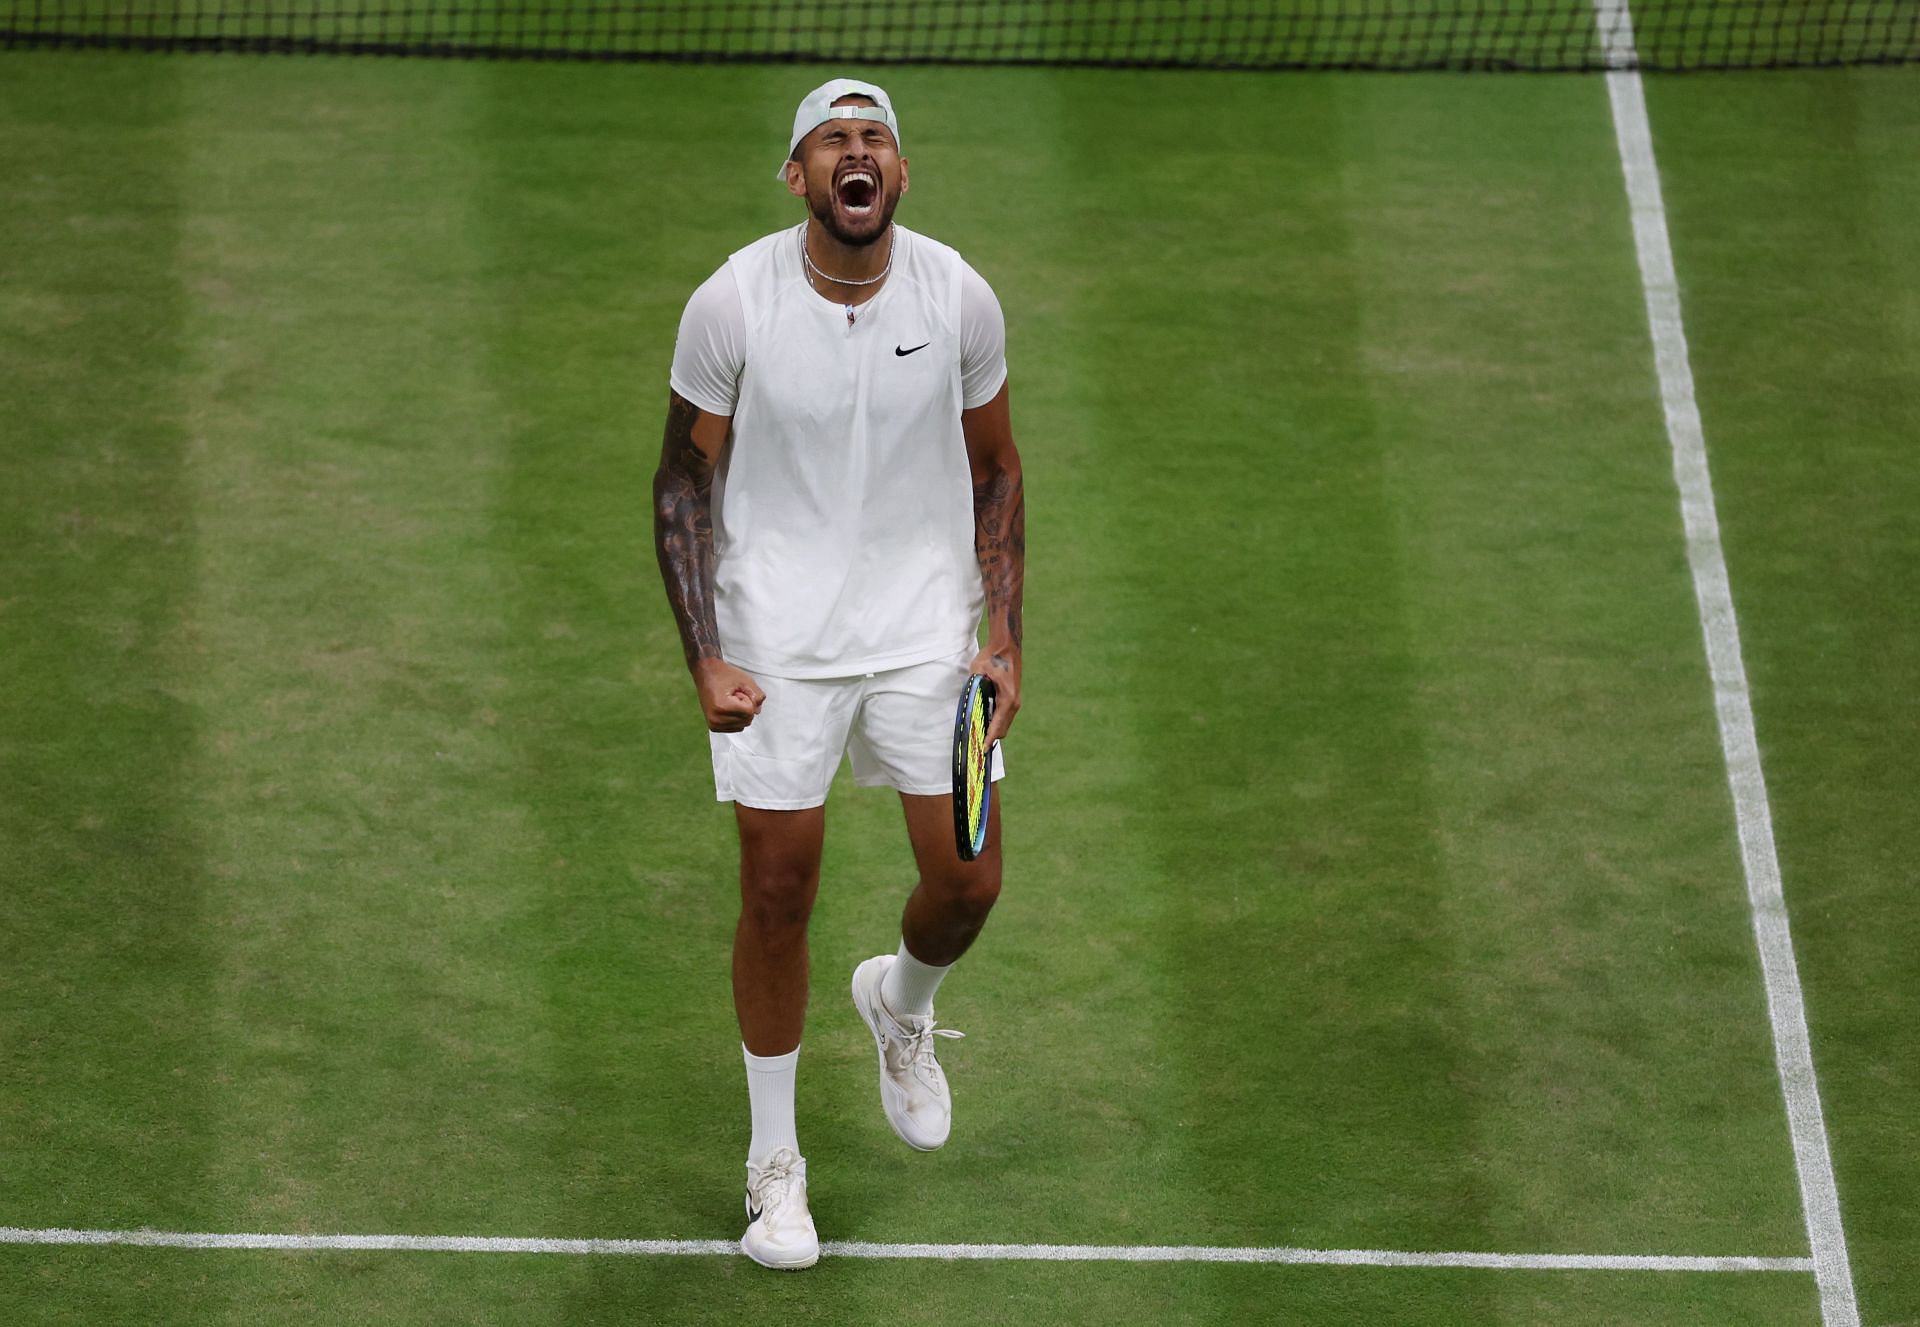 Nick Kyrgios will face Brandon Nakashima in the forth round of Wimbledon